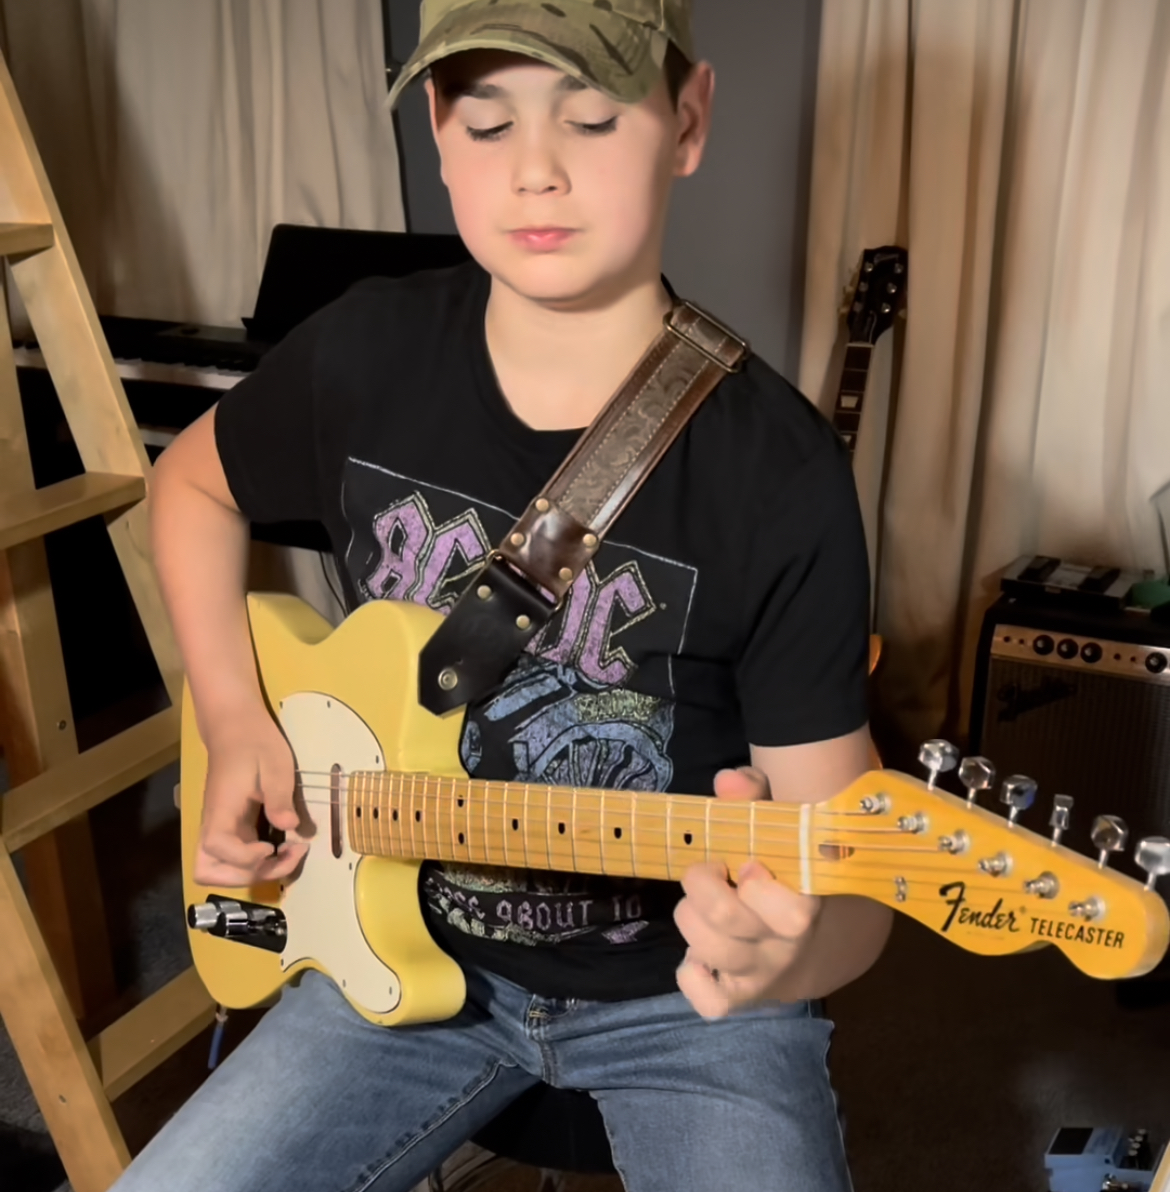 Rocco Gorelik: 13-year-old Artist is Playing at Cosmo's Pizza in Lawrenceville!